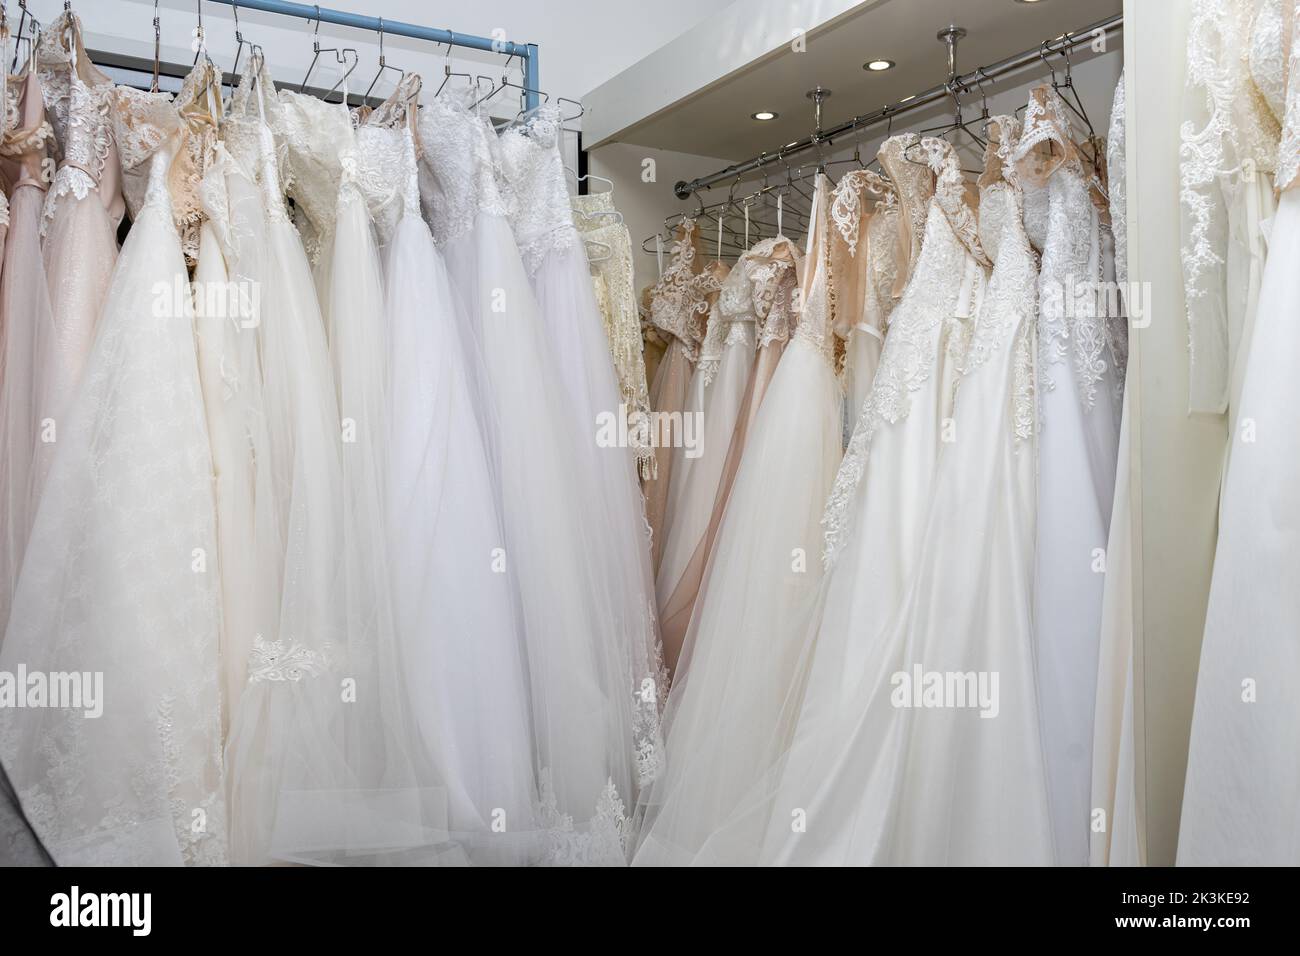 White and cream wedding dresses on a hanger in a bridal boutique. Close up Stock Photo